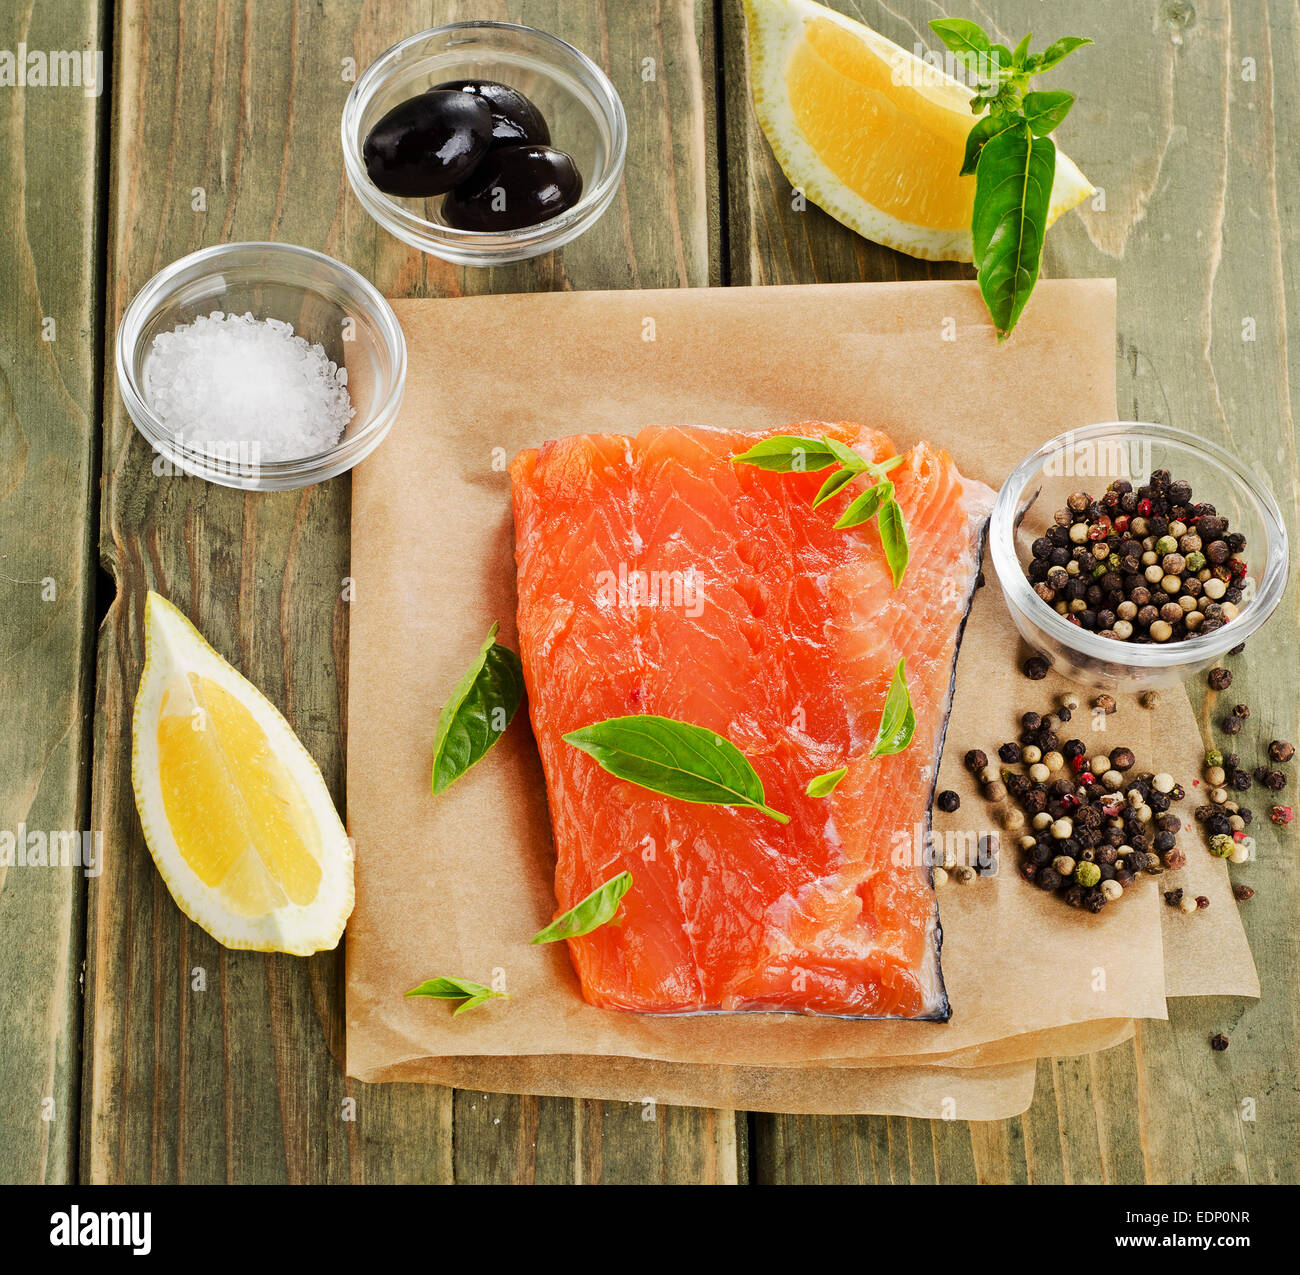 Salmon on a wooden board with lemon and herbs . Stock Photo